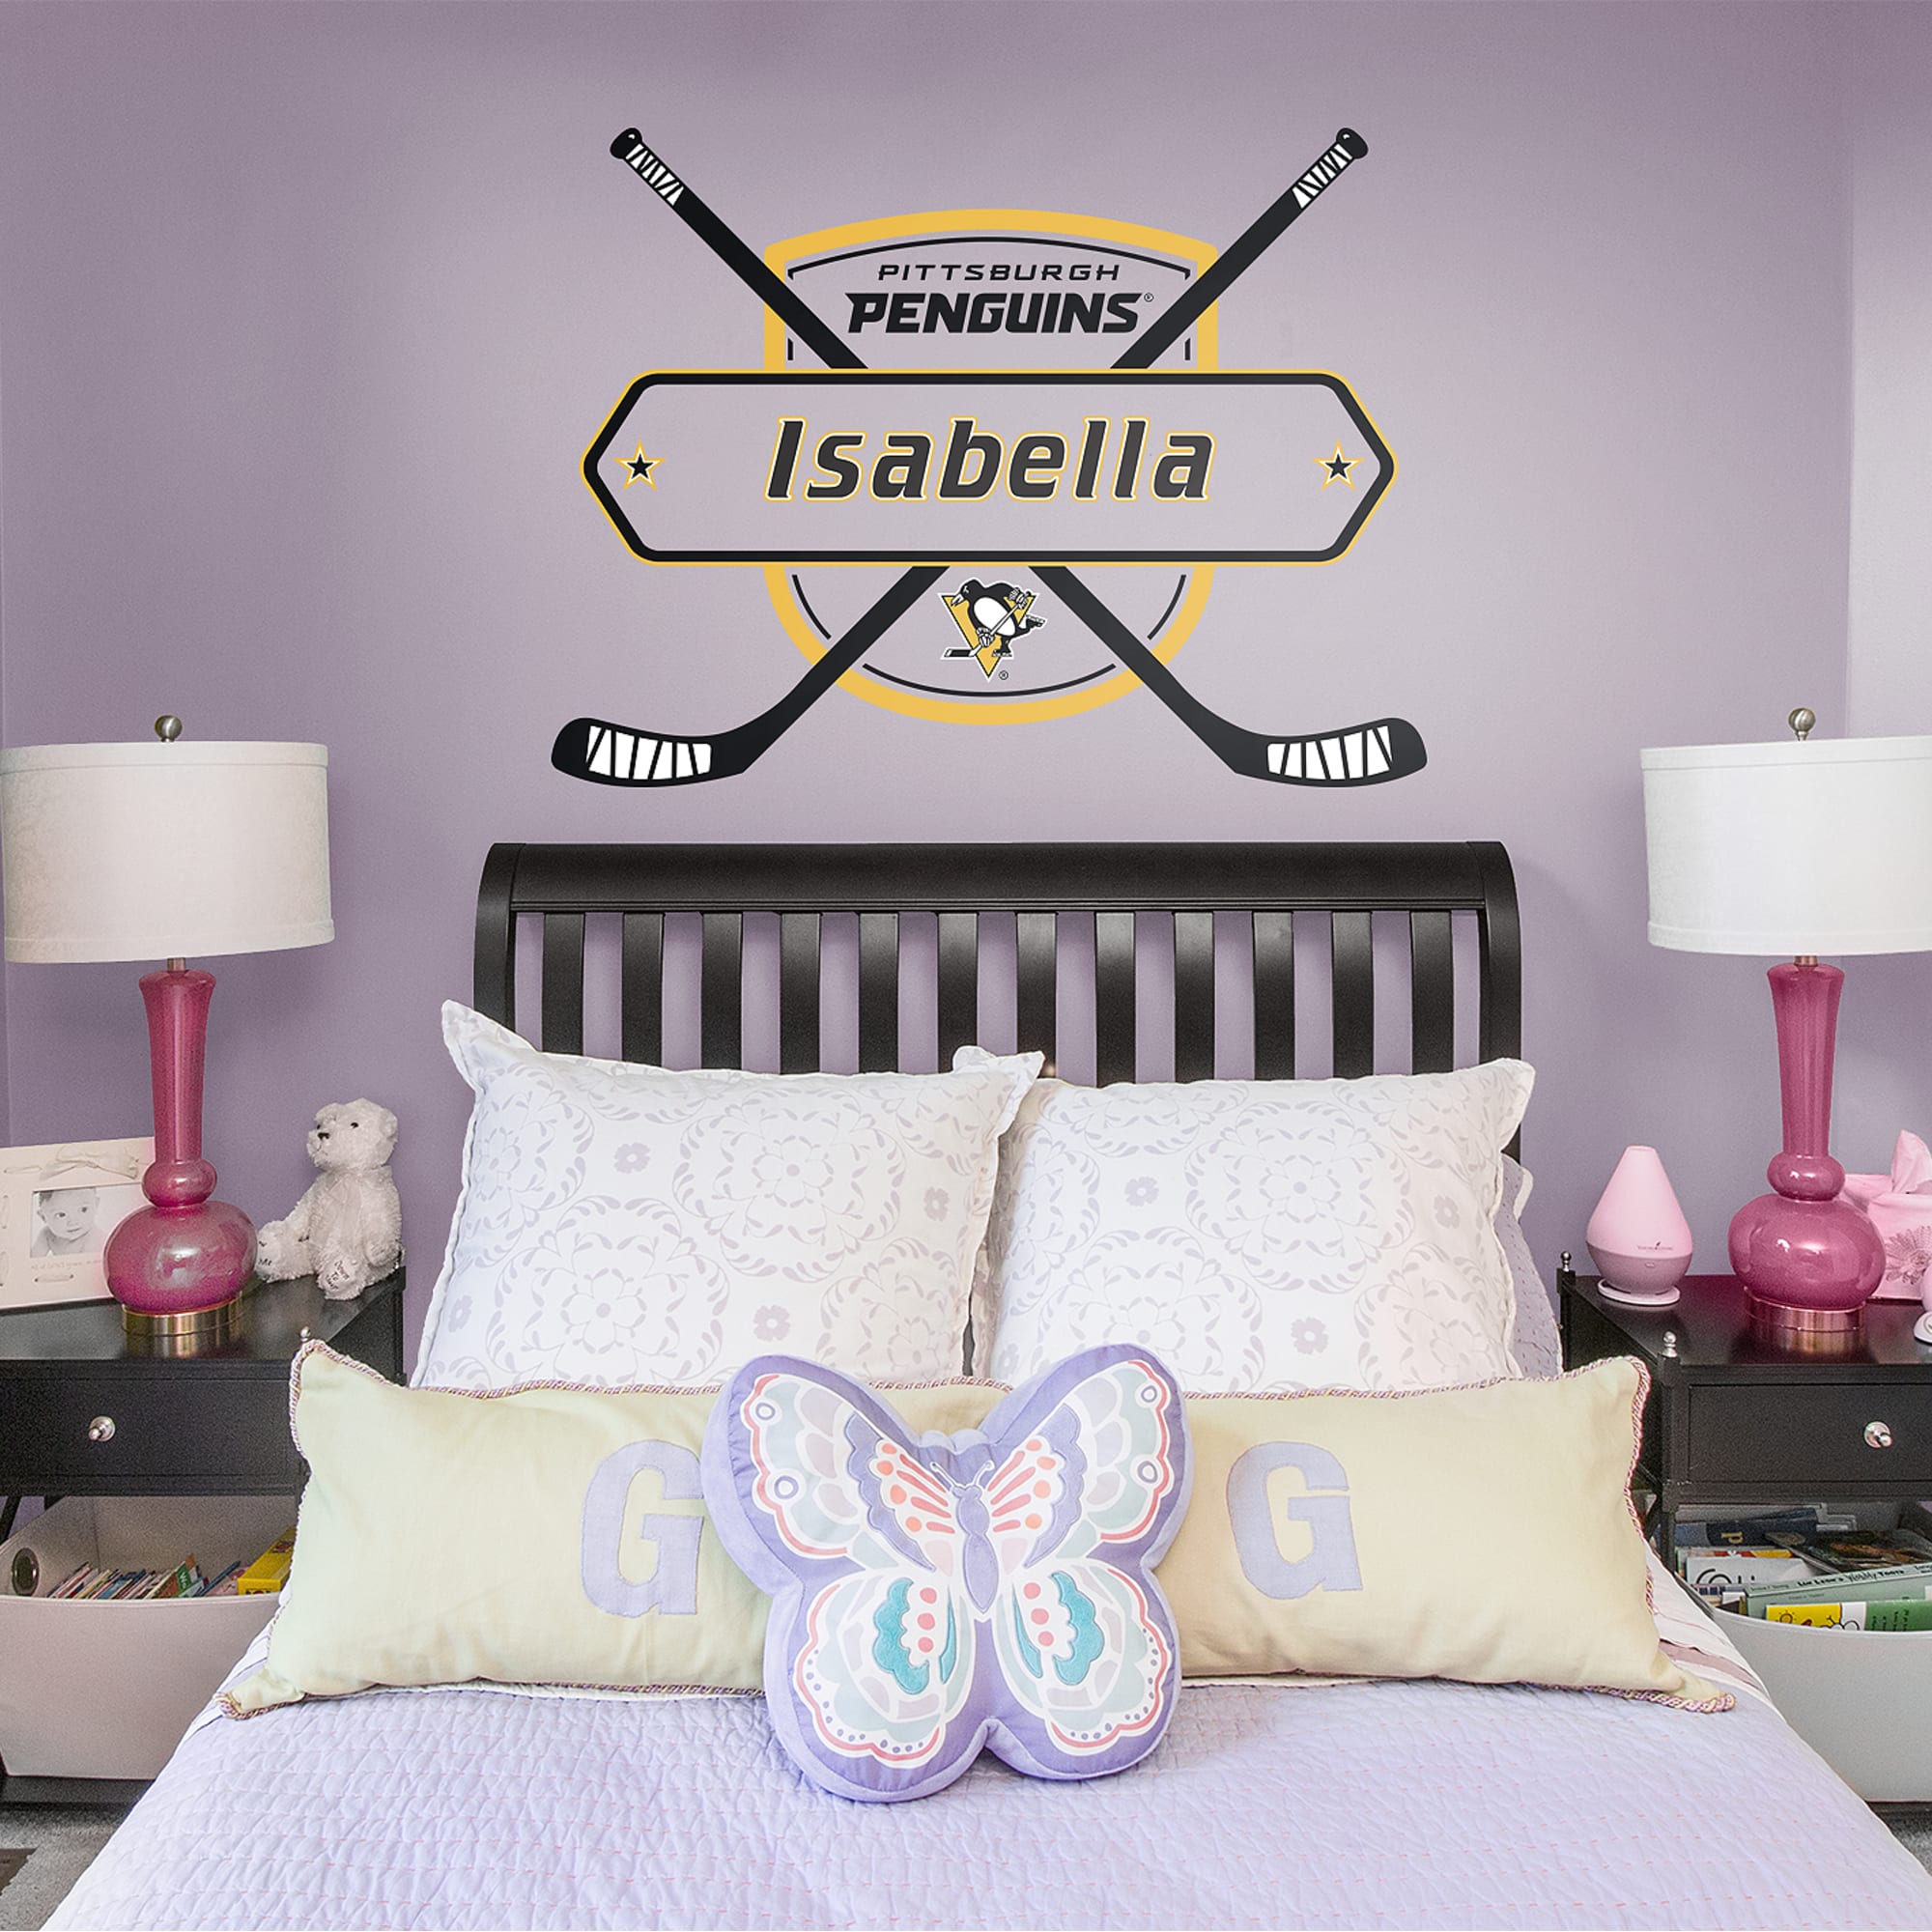 Pittsburgh Penguins: Personalized Name - Officially Licensed NHL Transfer Decal 52.0"W x 39.5"H by Fathead | Vinyl